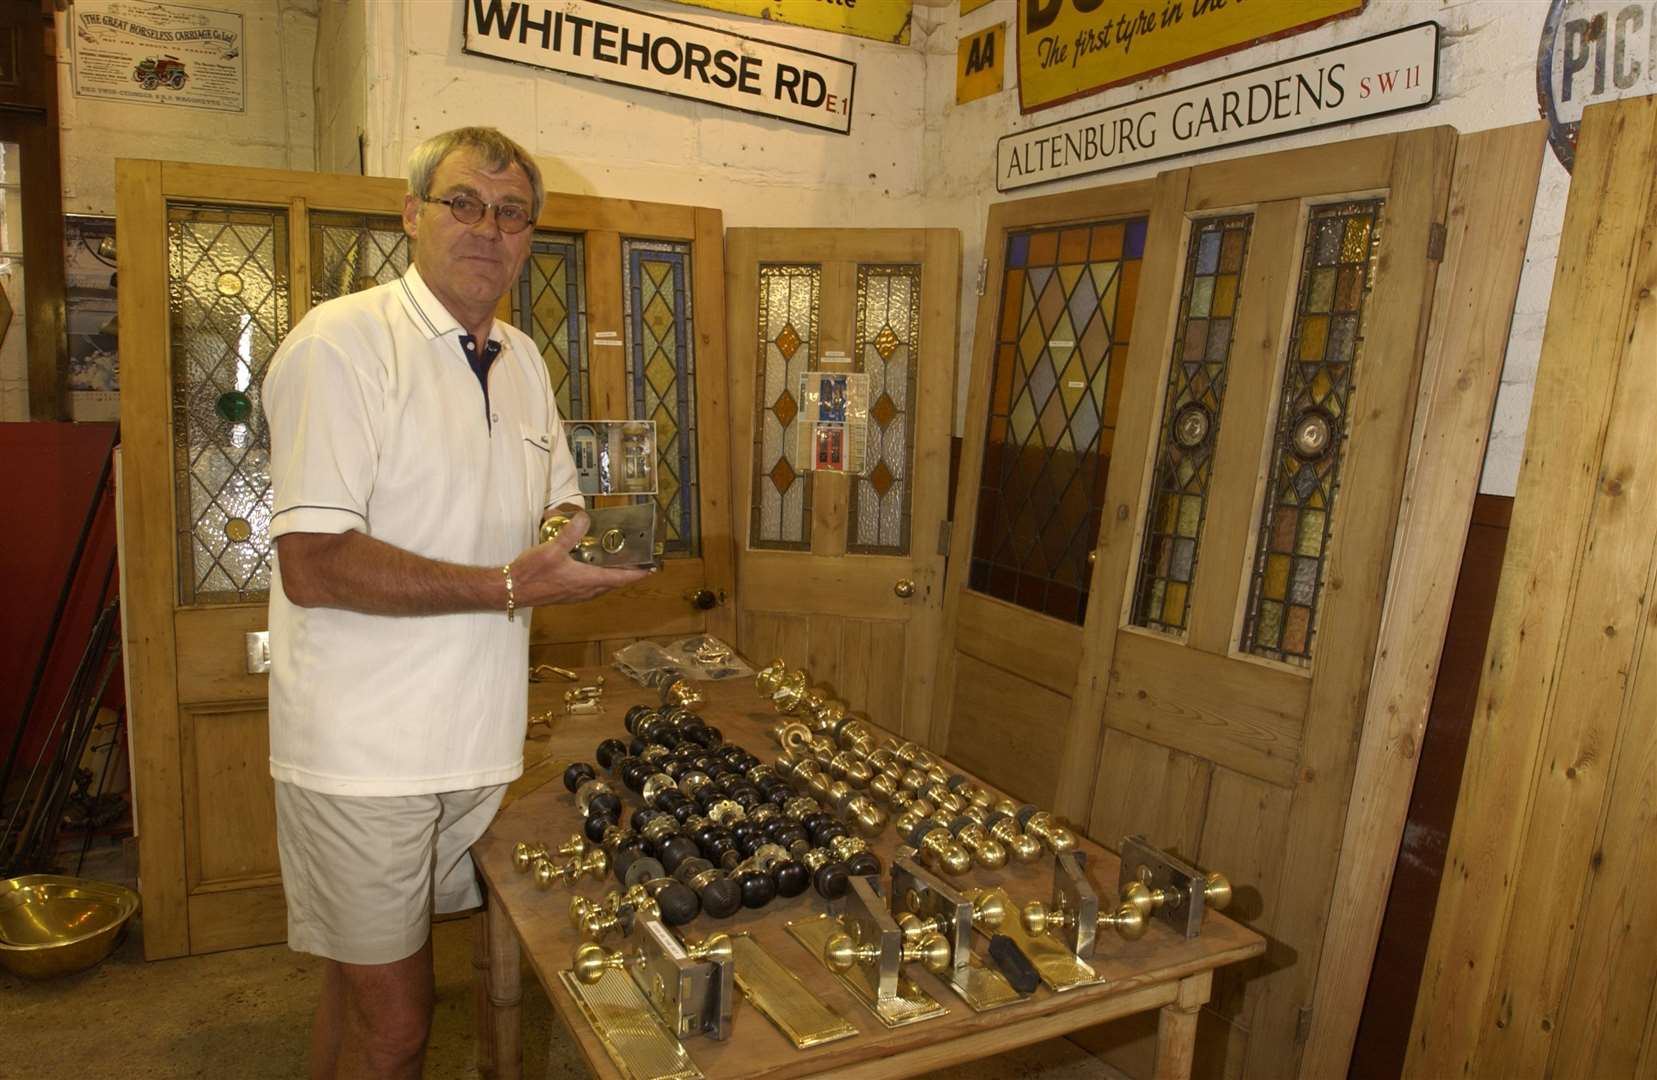 The market will be built on the site of the former Bygones Reclamation Yard. Pictured is former owner Bob Thorpe in 2003